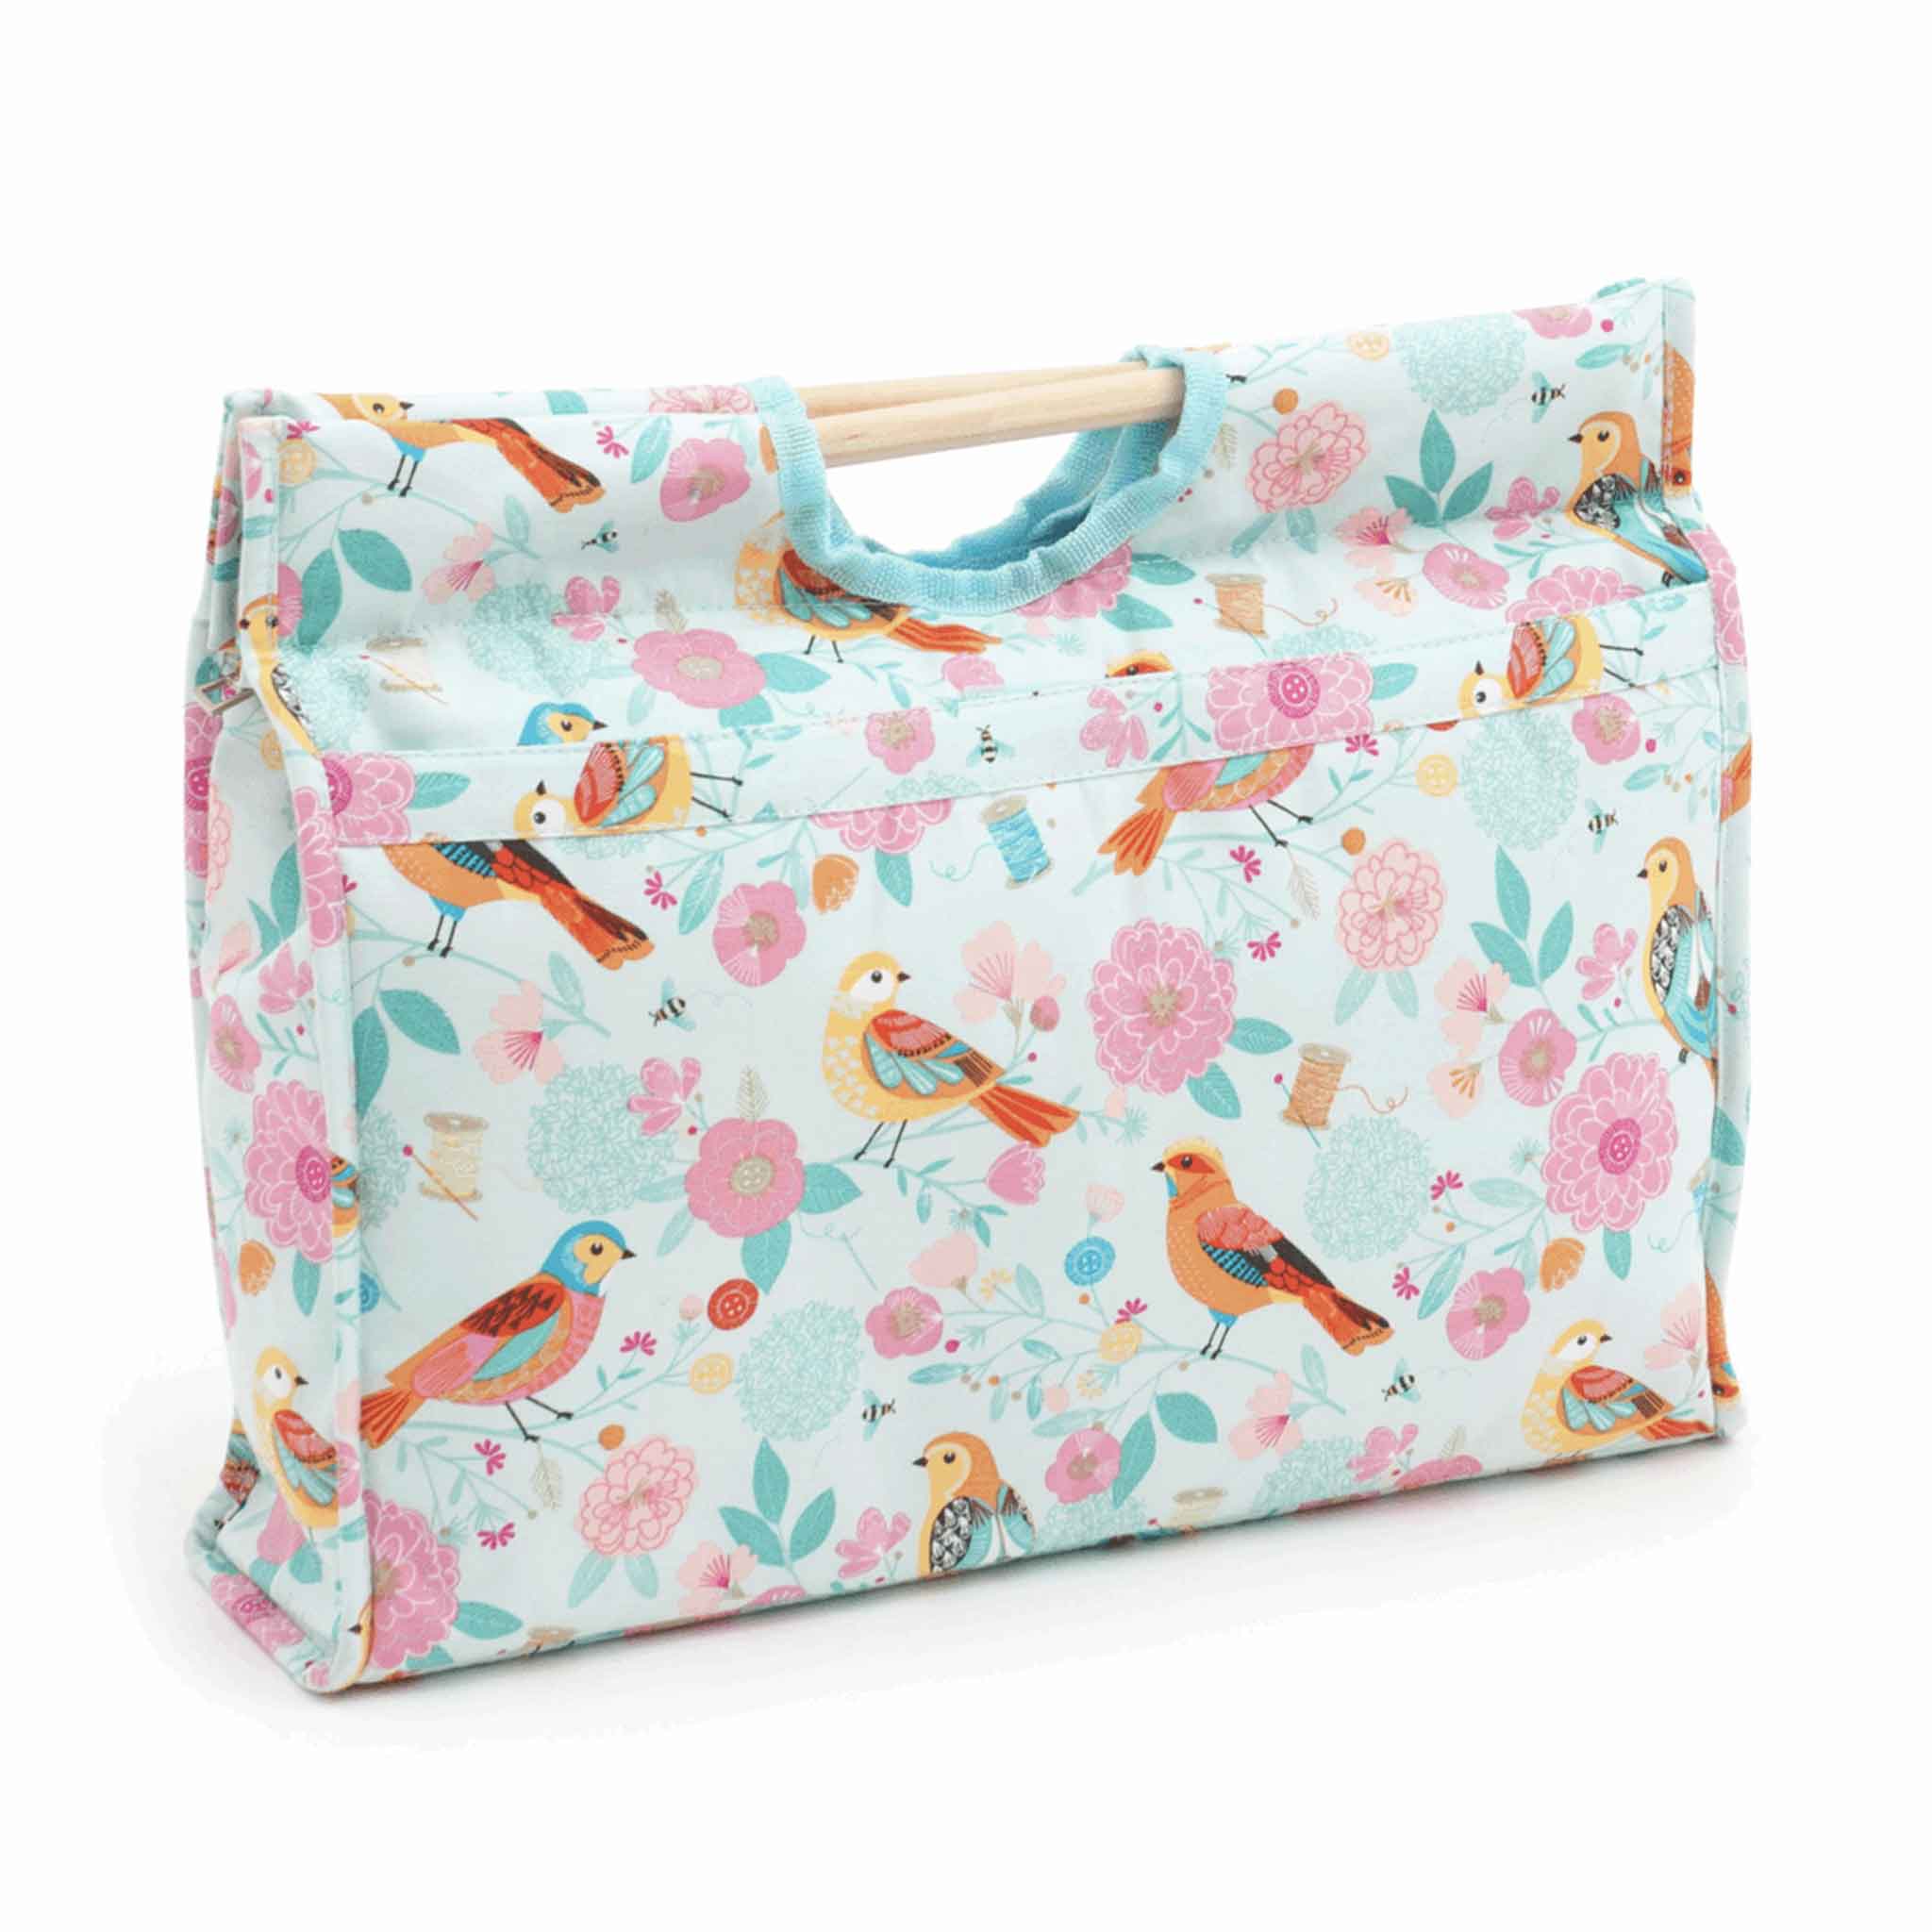 Craft Bag with Wooden Handles Birdsong - Hobby Gift MR4687\275